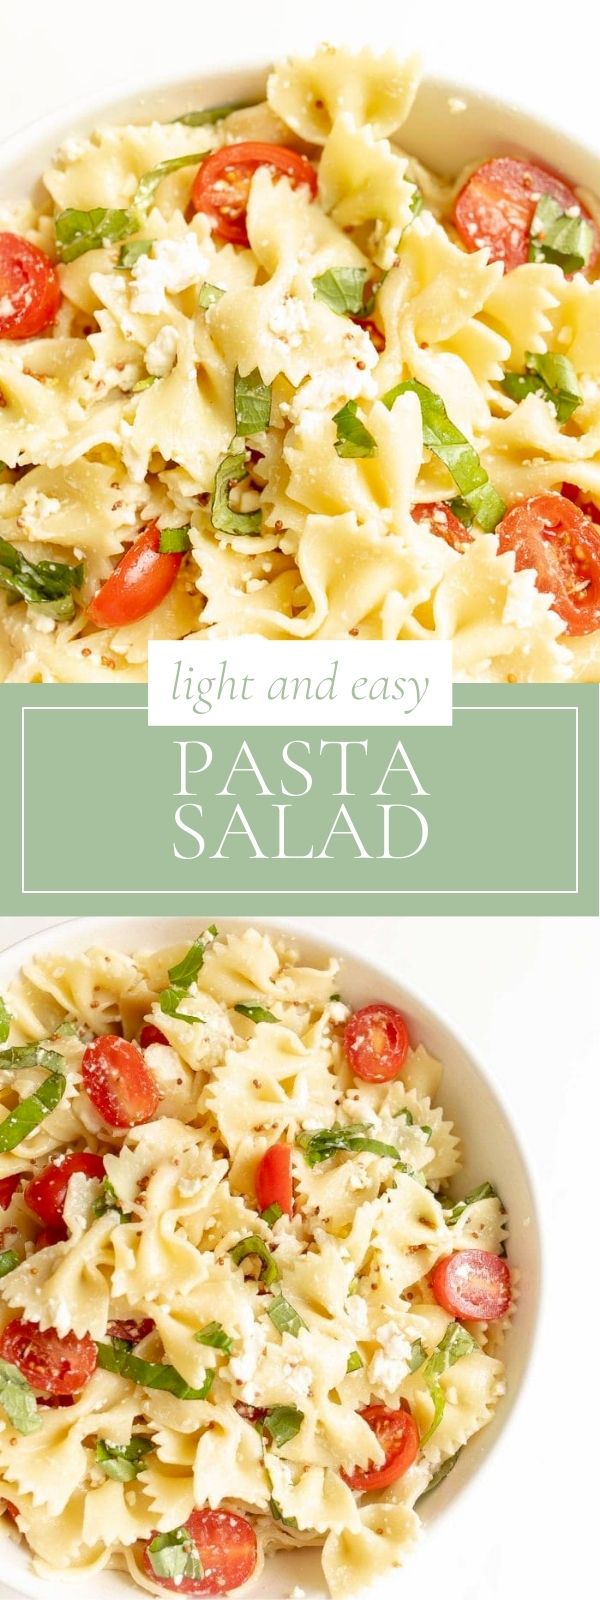 On a marble counter there is a round white bowl of light and easy pasta salad.